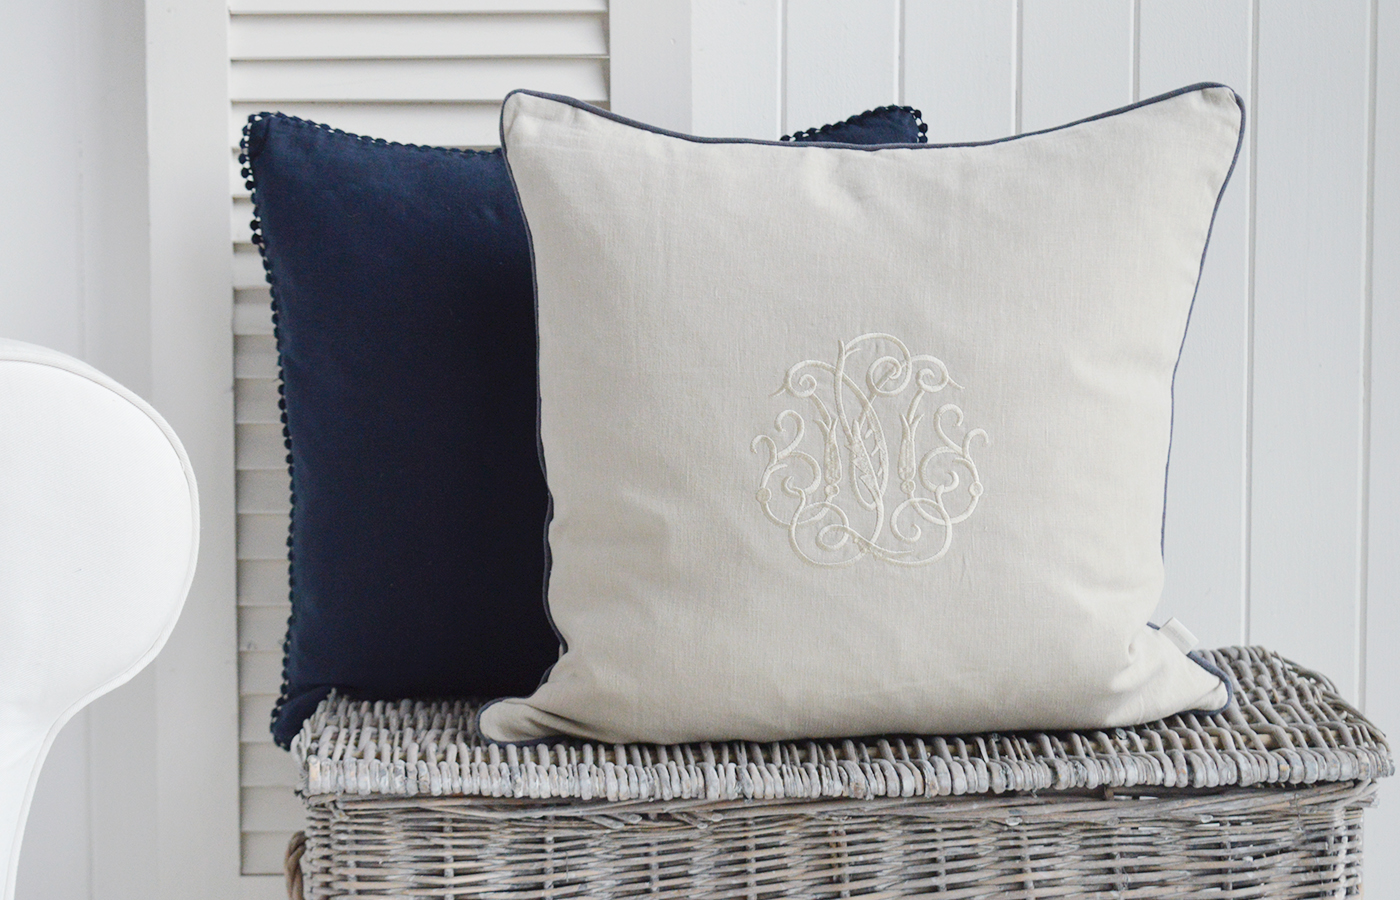 New England Style cushions for modern country, farmhouse and Coastal .  White and coastal furniture for homes and interiors. Richmond 100% stonewashed natural Linen Feather Filled Cushion with navy piping